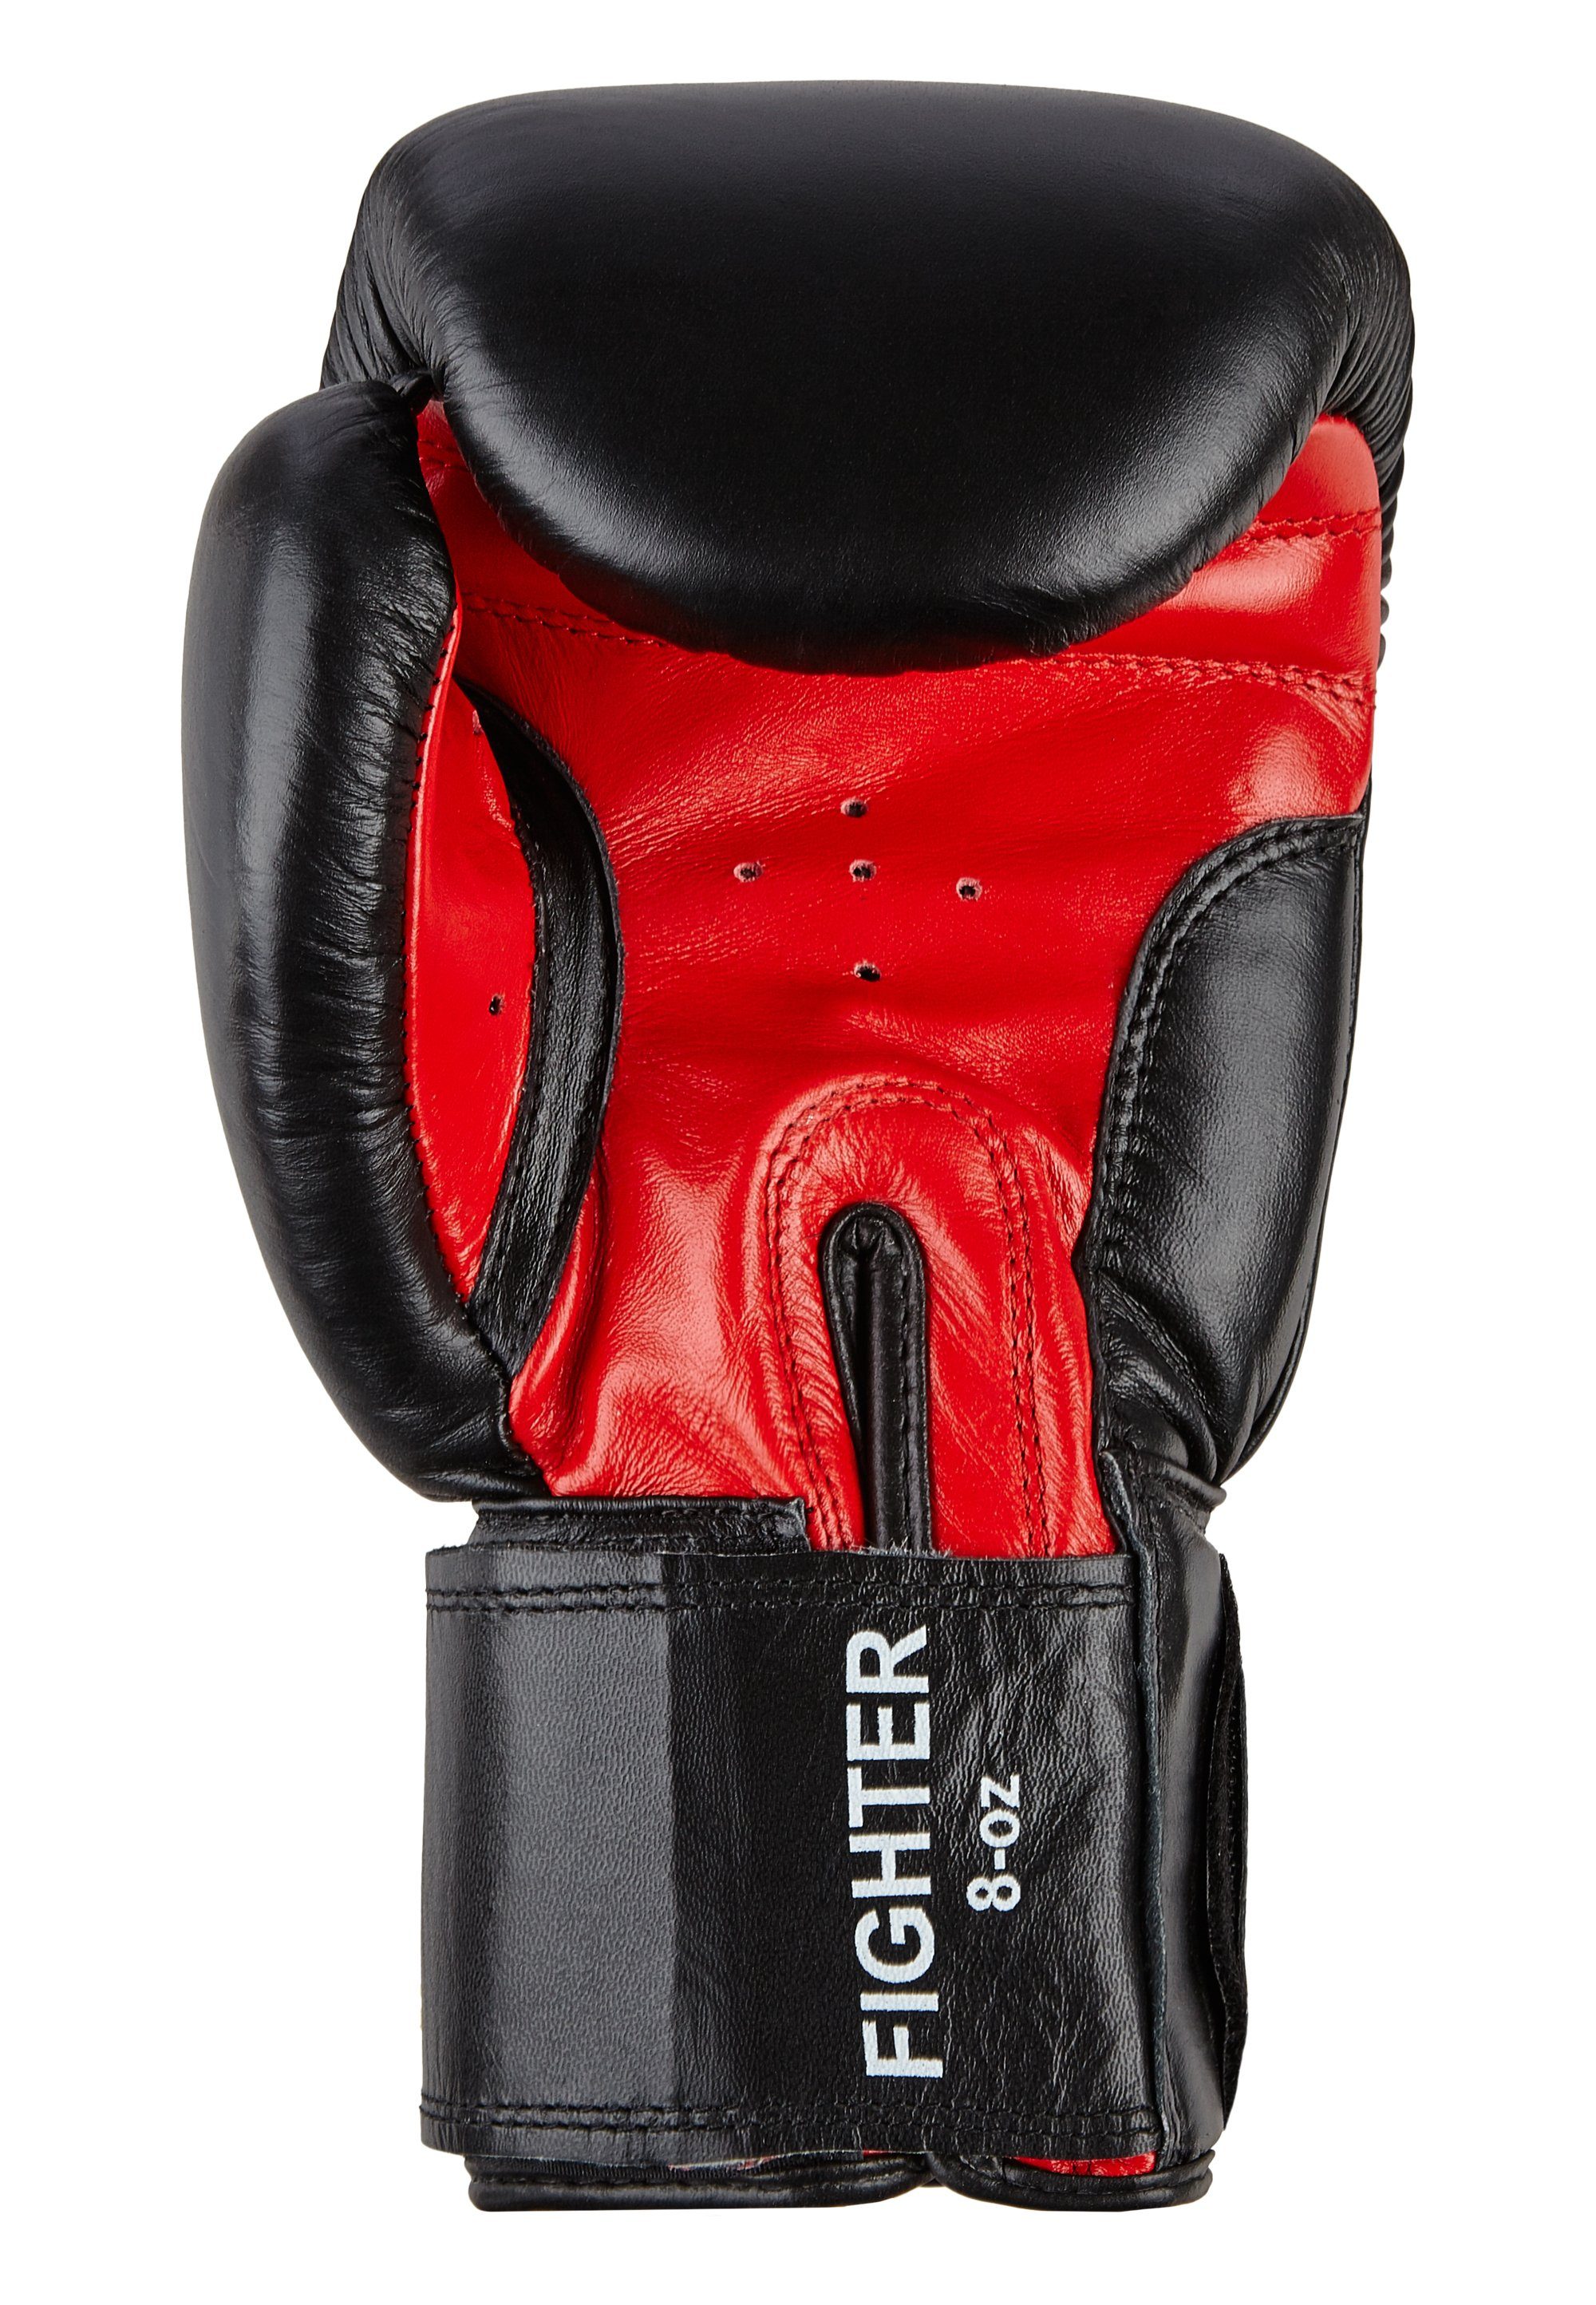 FIGHTER Benlee Boxhandschuhe Marciano Black/Red Rocky